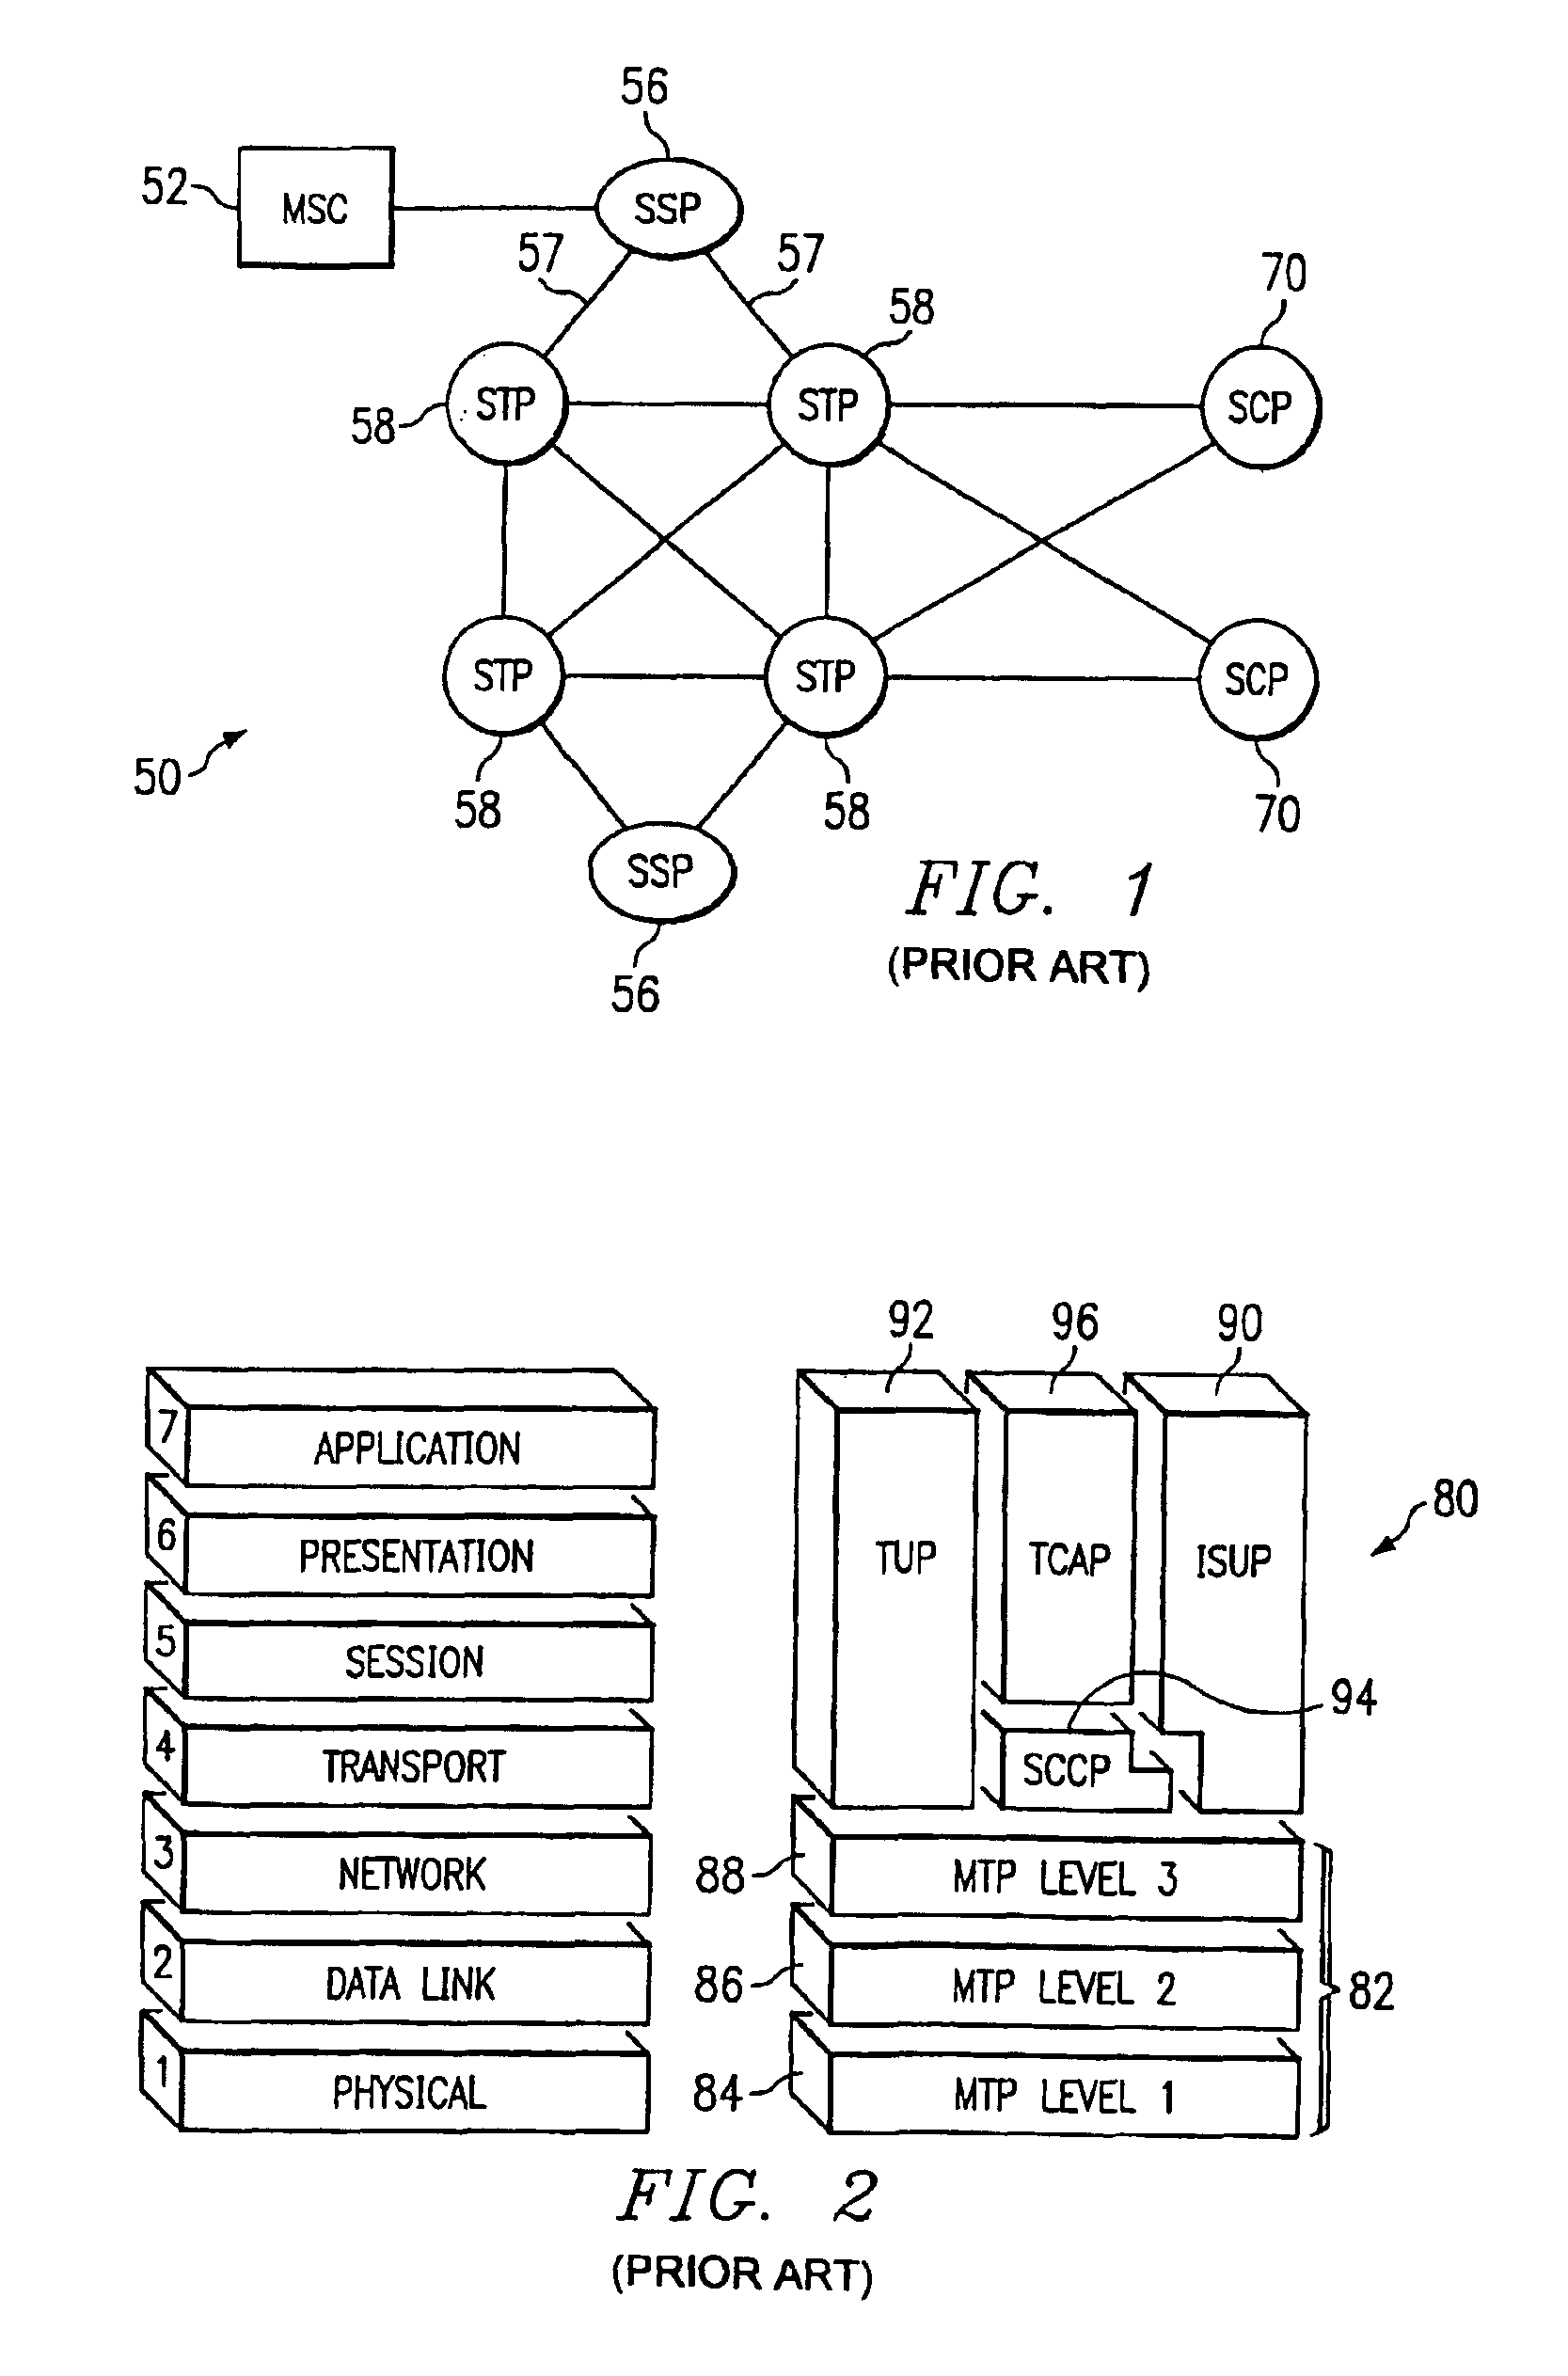 Method, system and signaling gateways as an alternative to SS7 signal transfer points